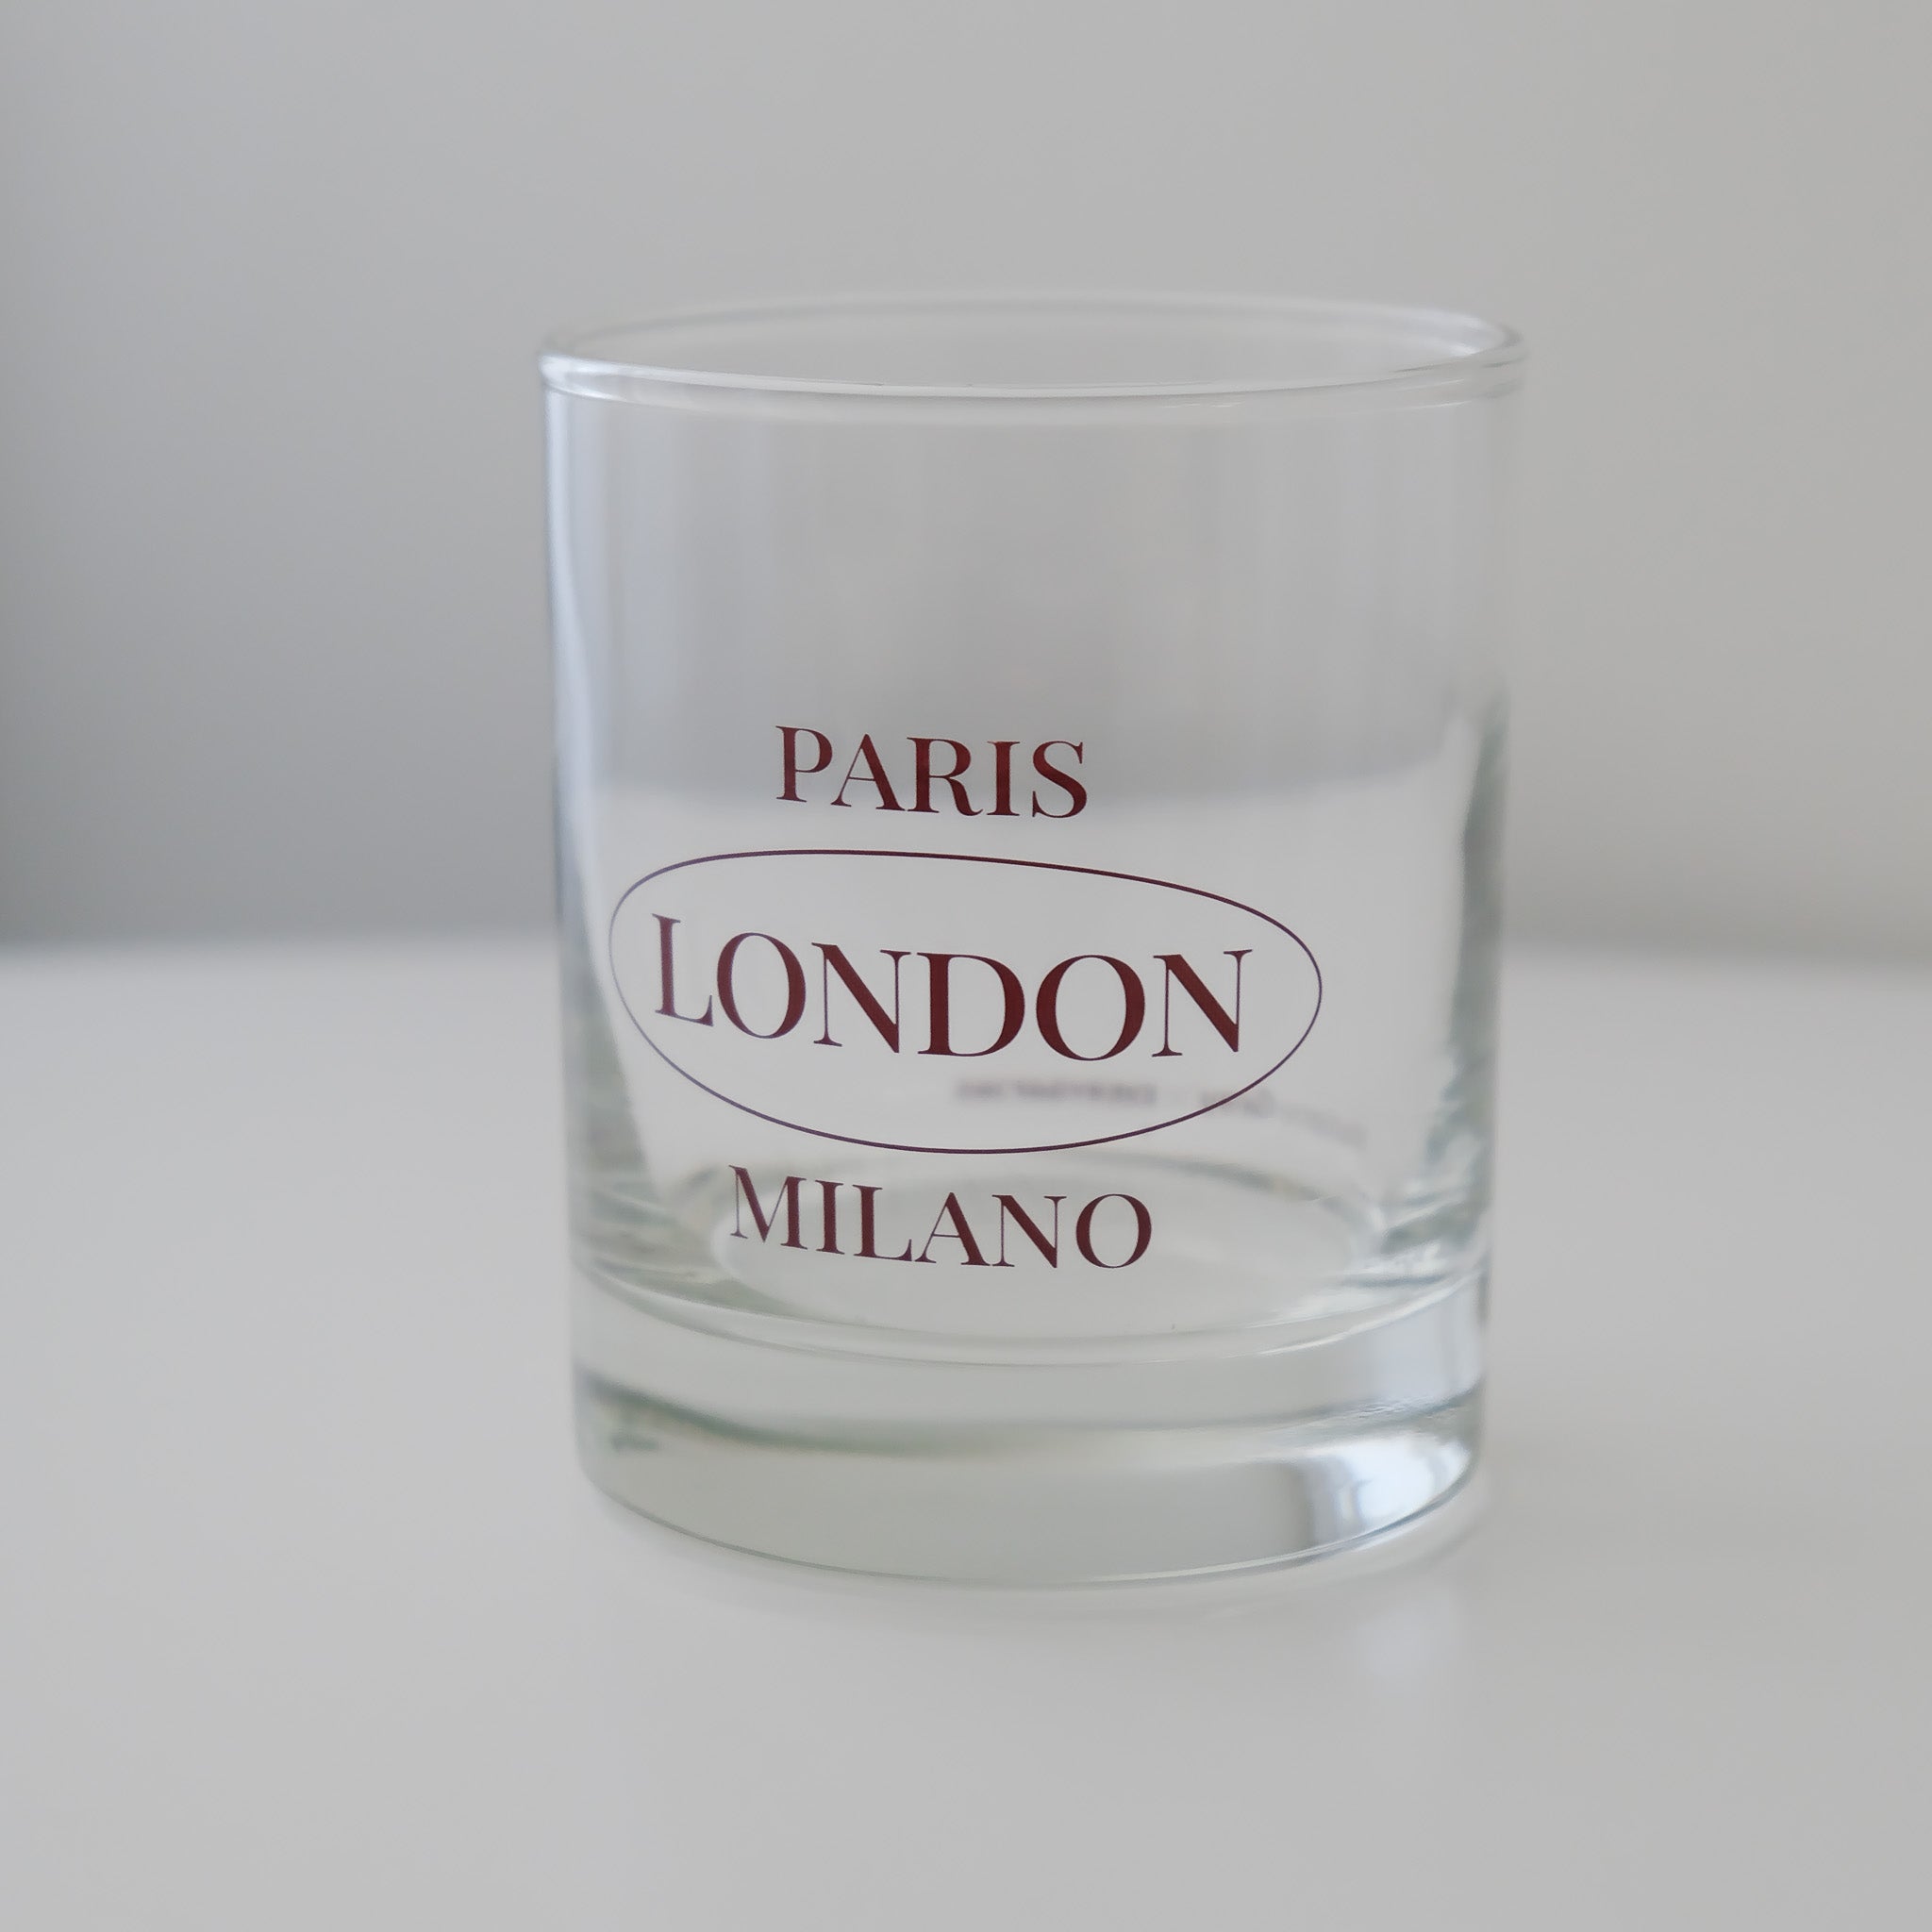 London to Paris Glass Cup (2 Styles)